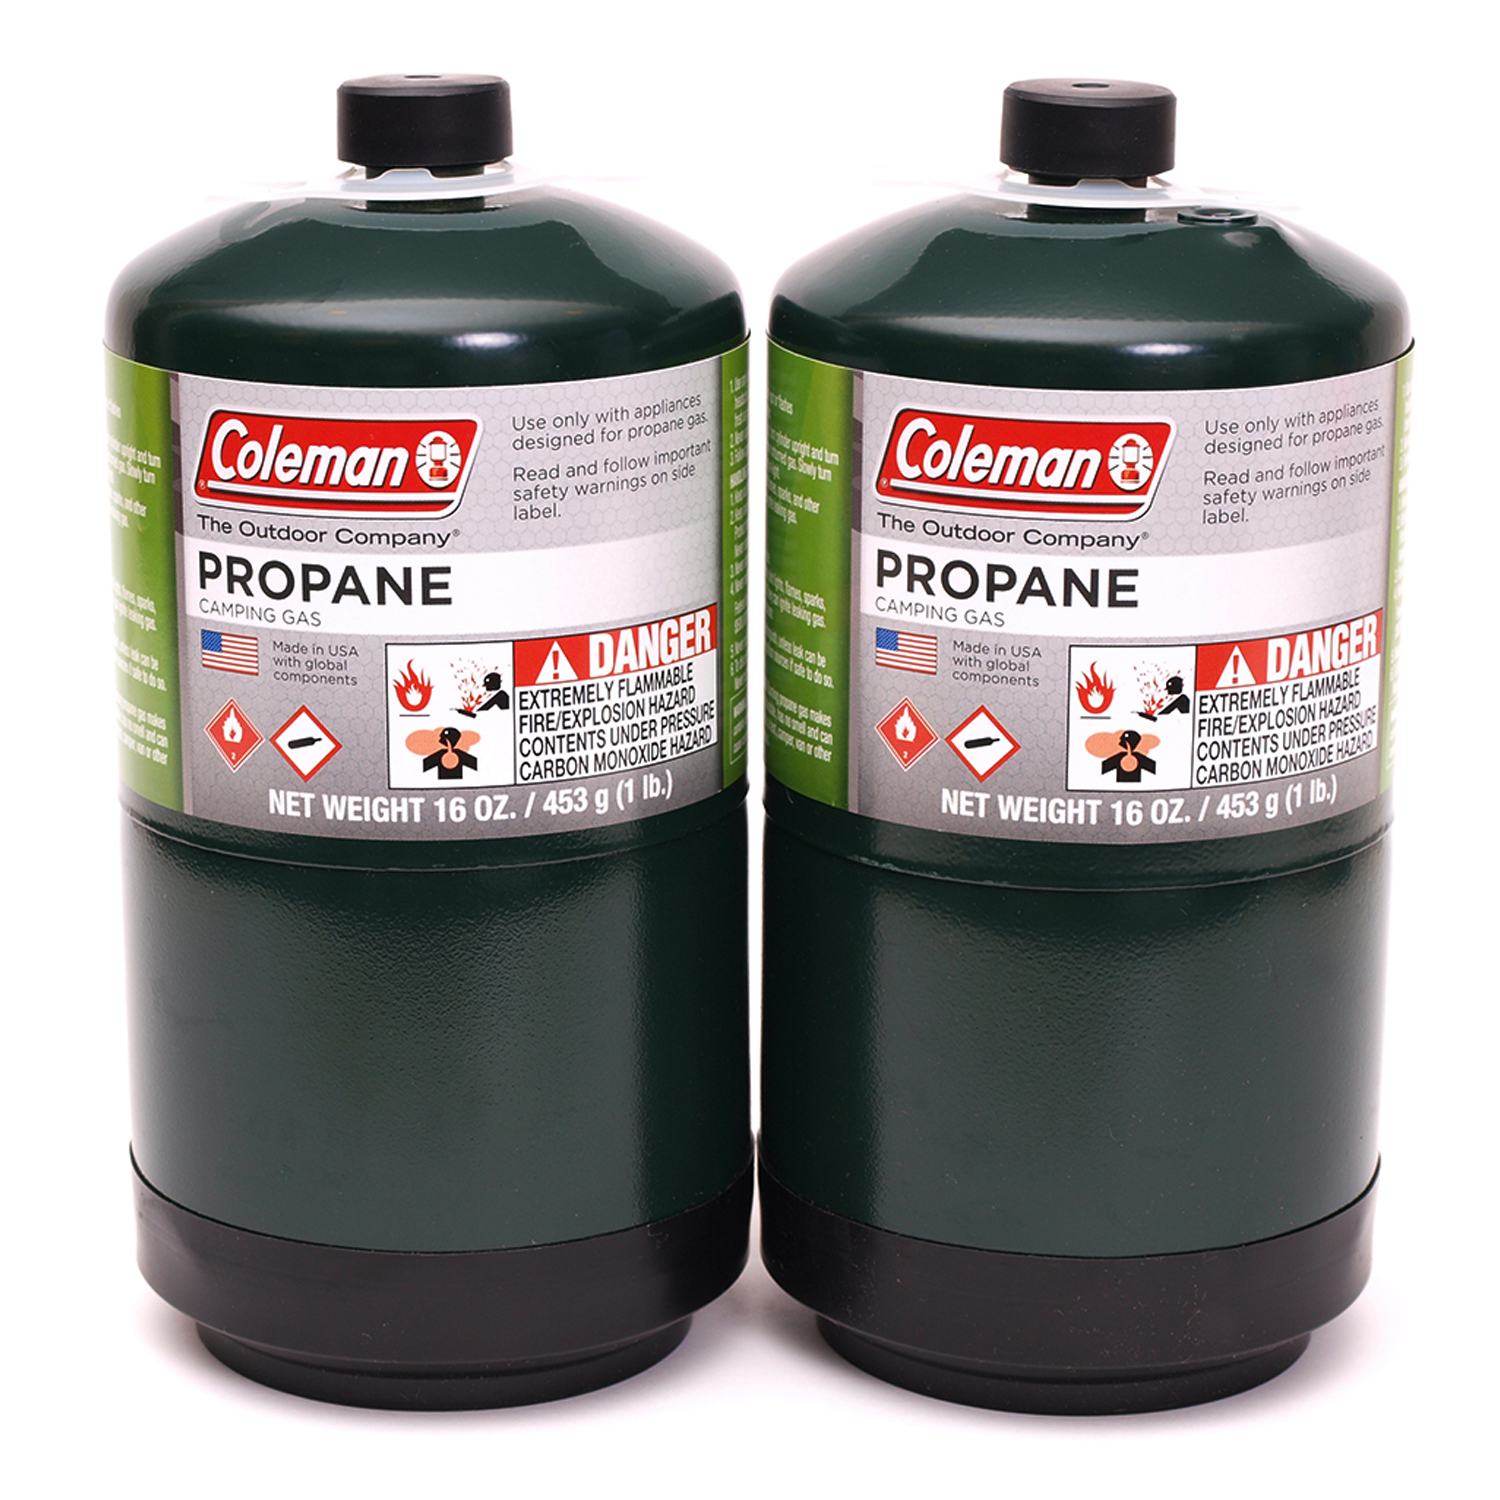 Coleman Propane Camping Gas Cylinder 2-Pack - image 1 of 3